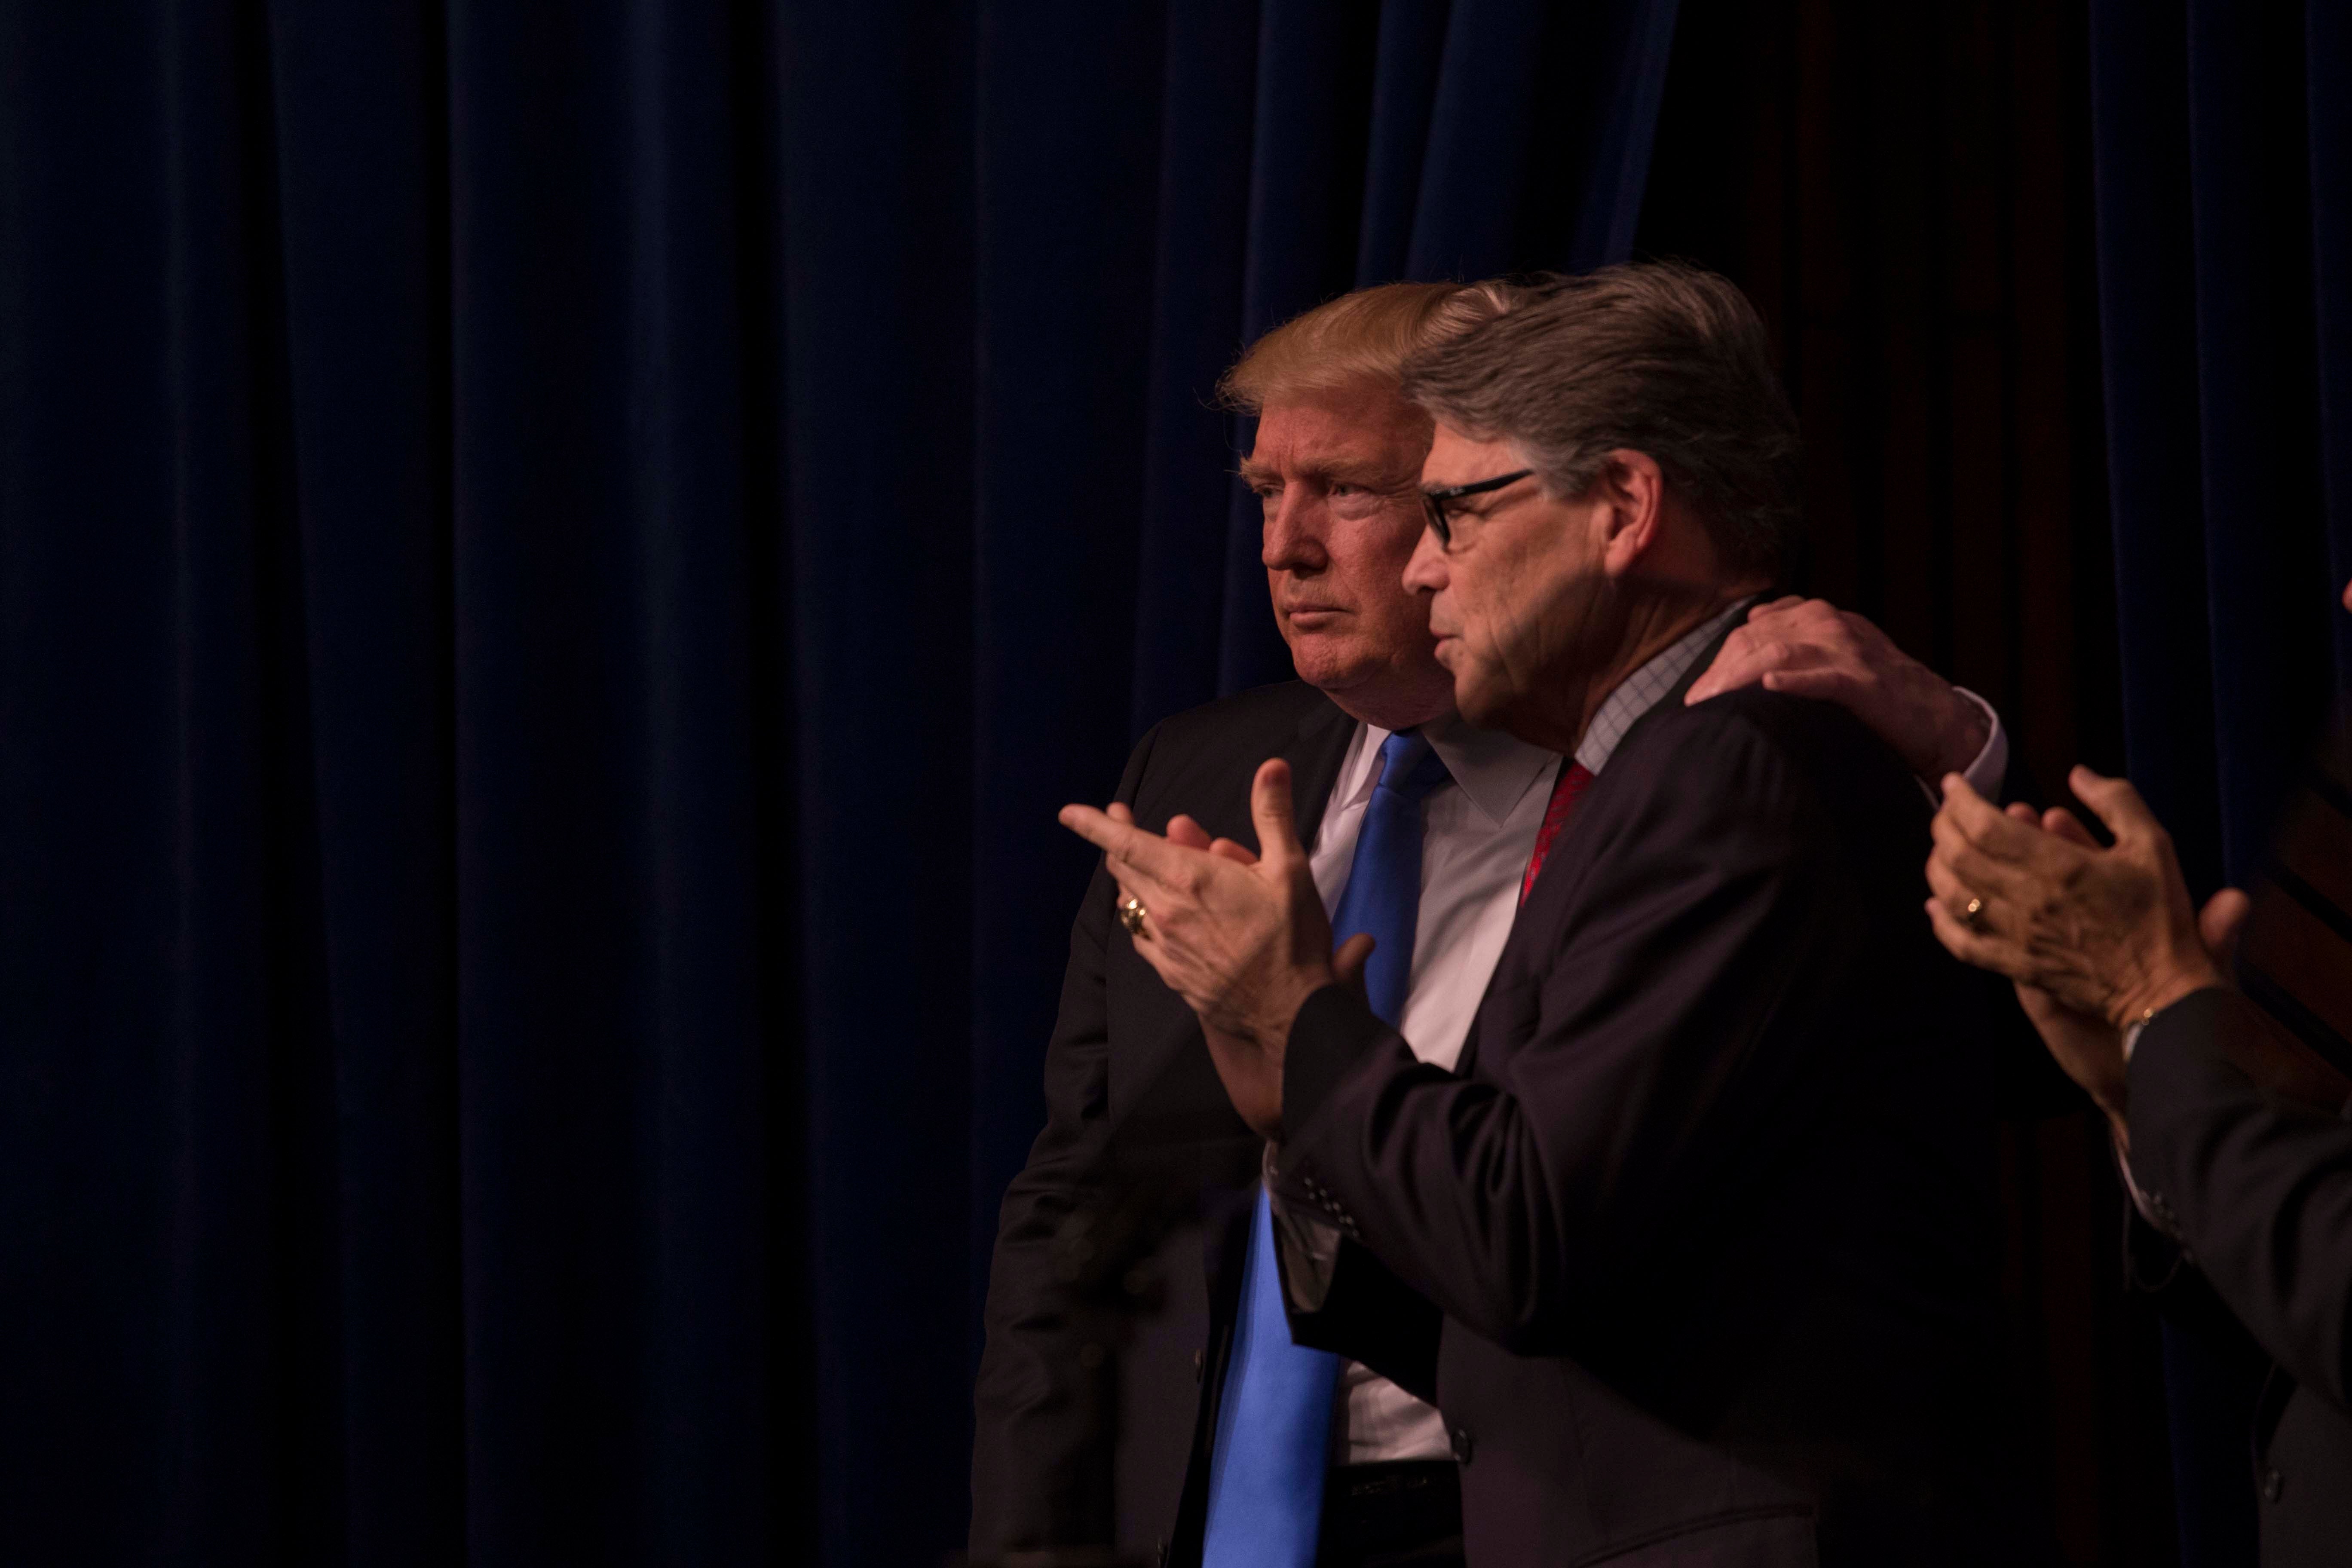 President Donald Trump and Secretary of Energy Rick Perry share a moment.